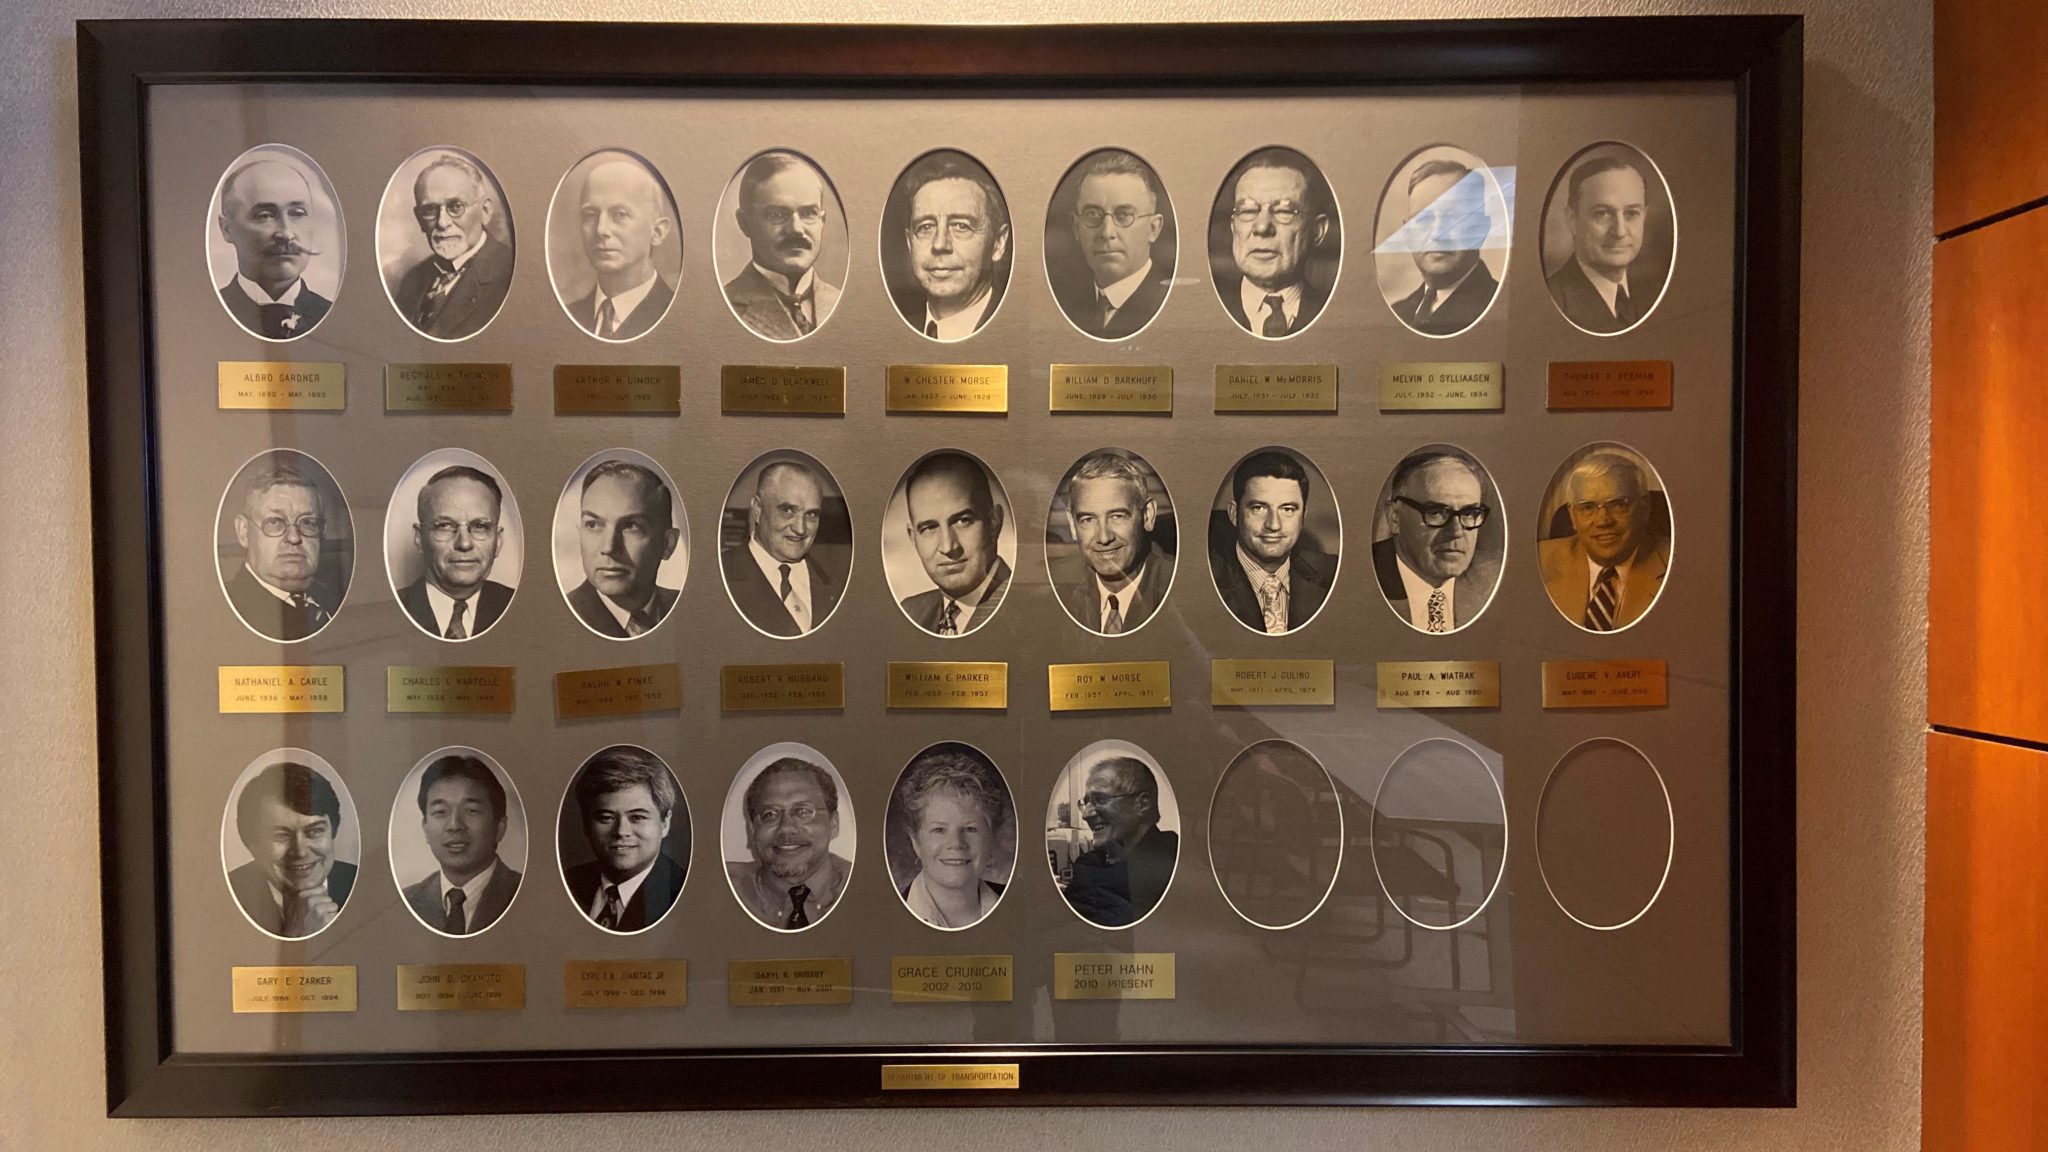 SDOT (formally known as Seattle Engineering Department) Directors through the years.